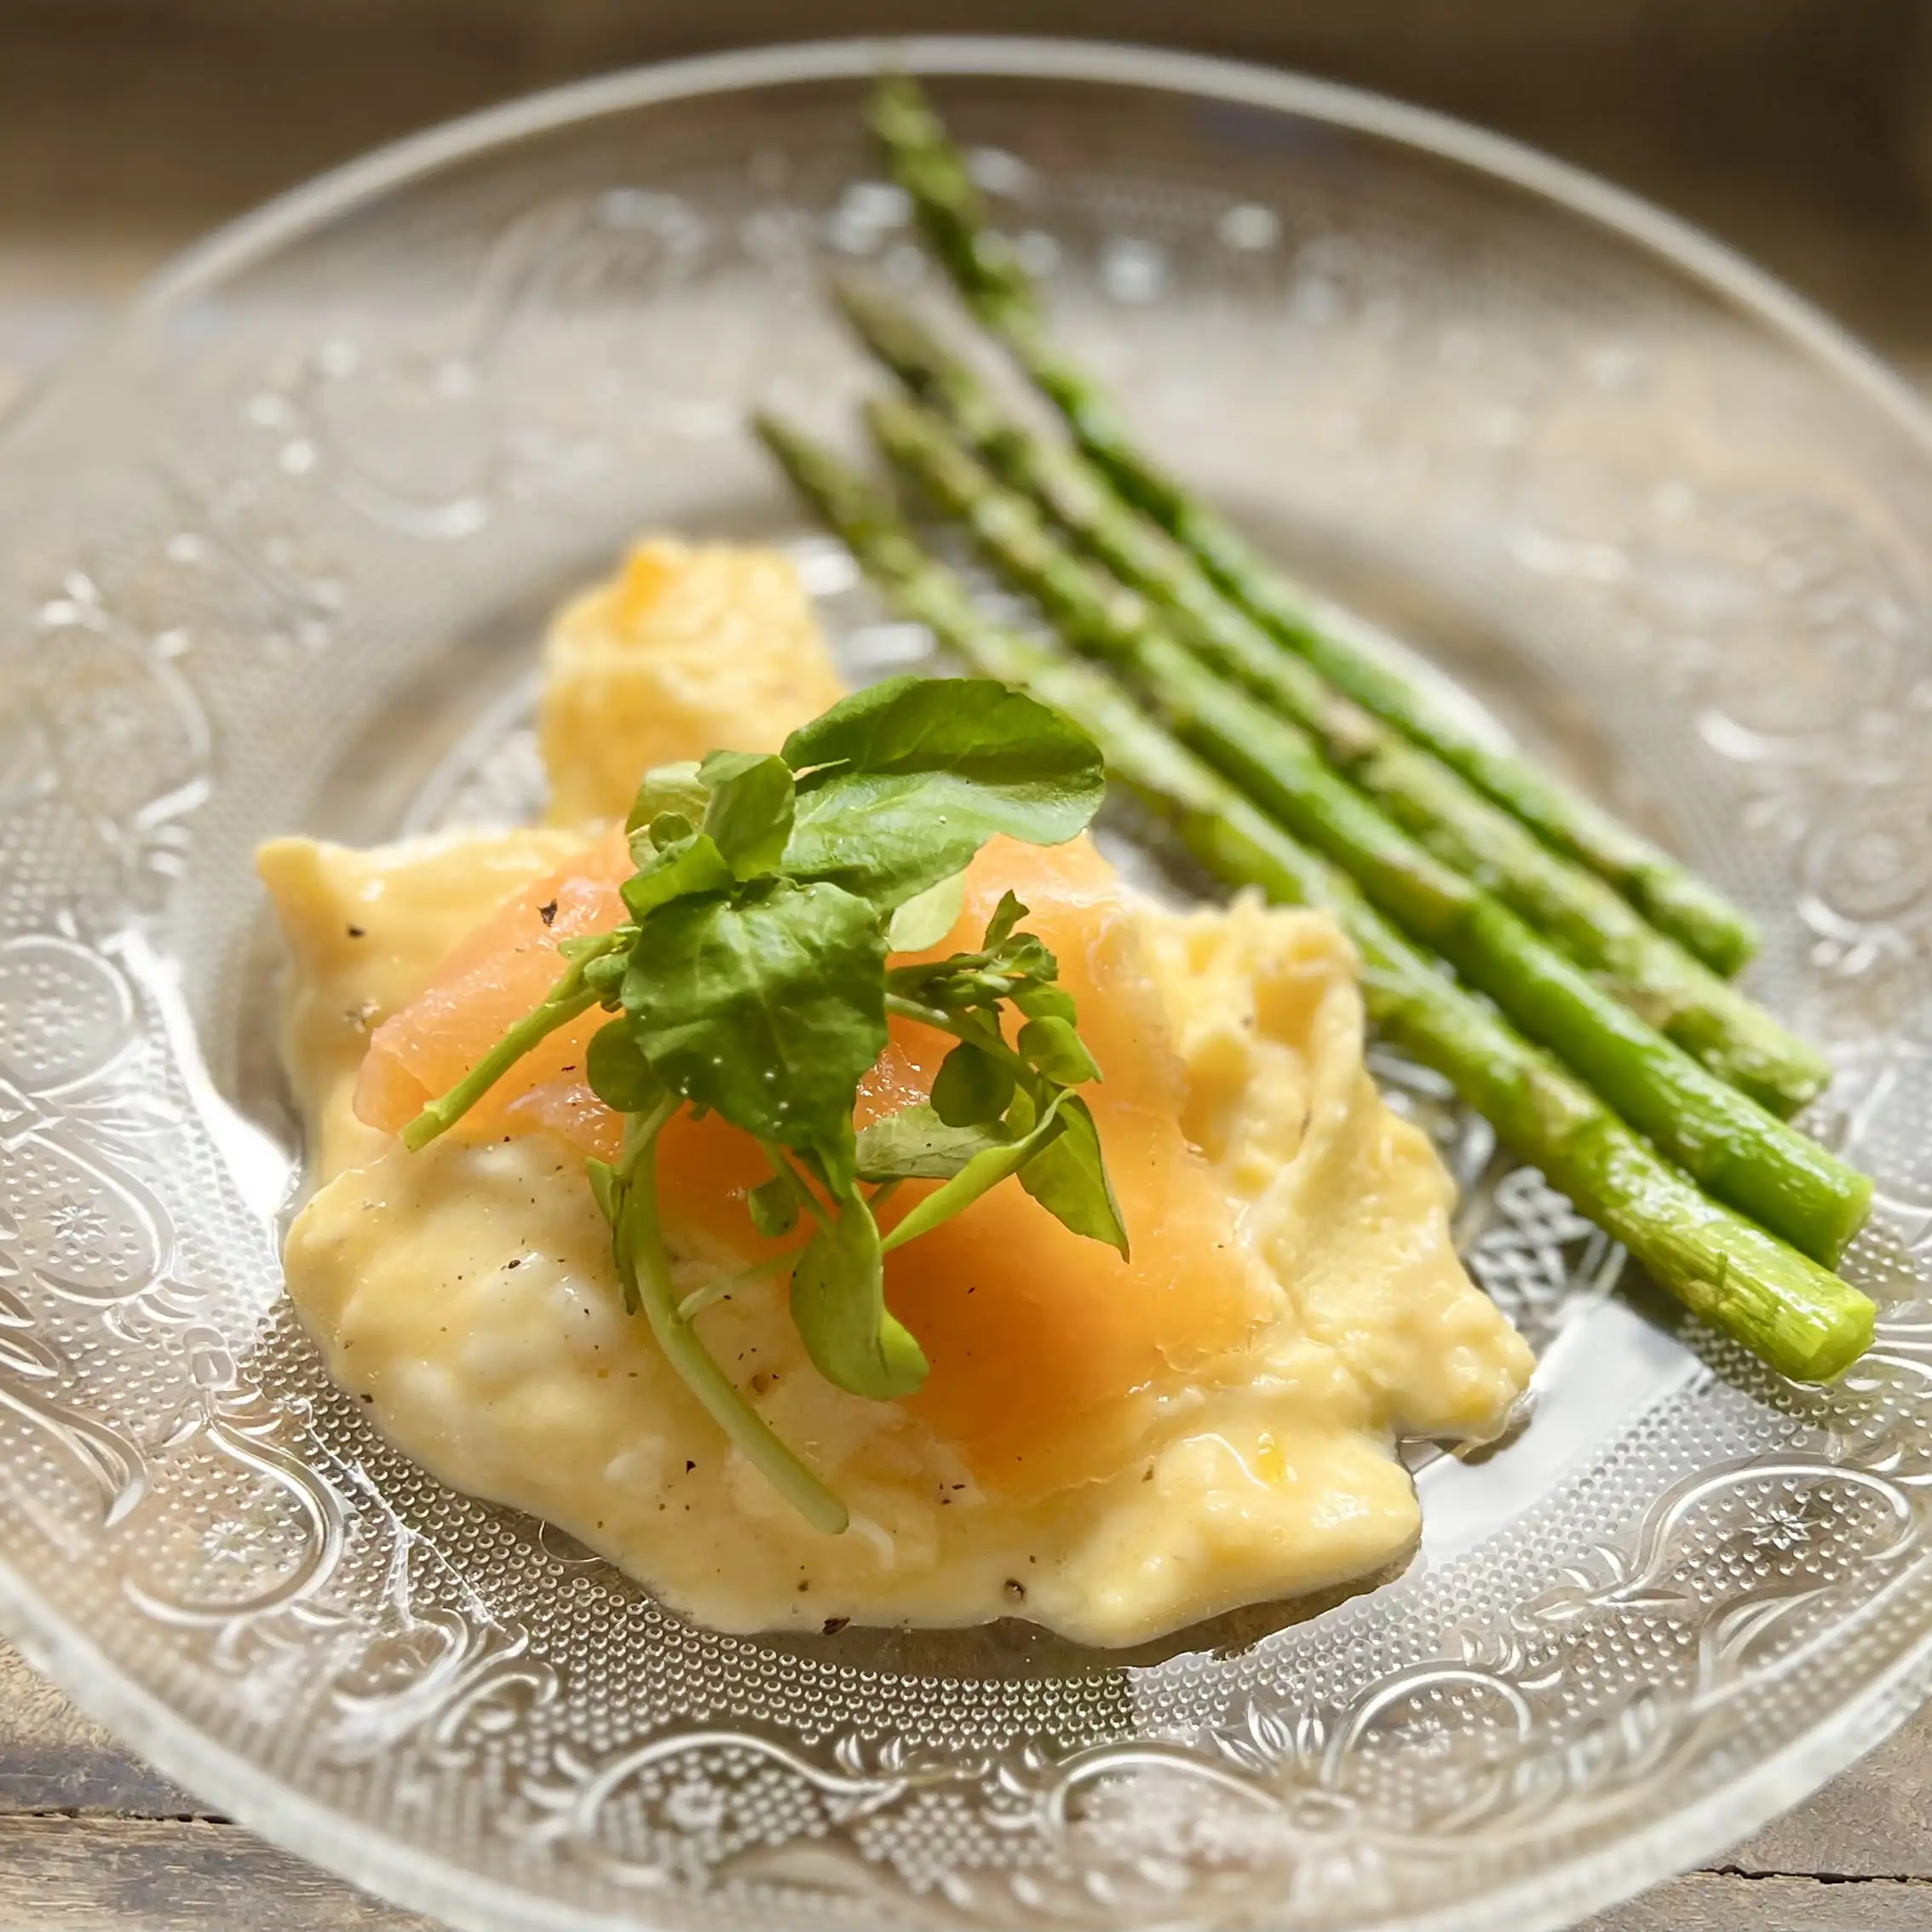 Scrambled eggs with salmon and asparagus